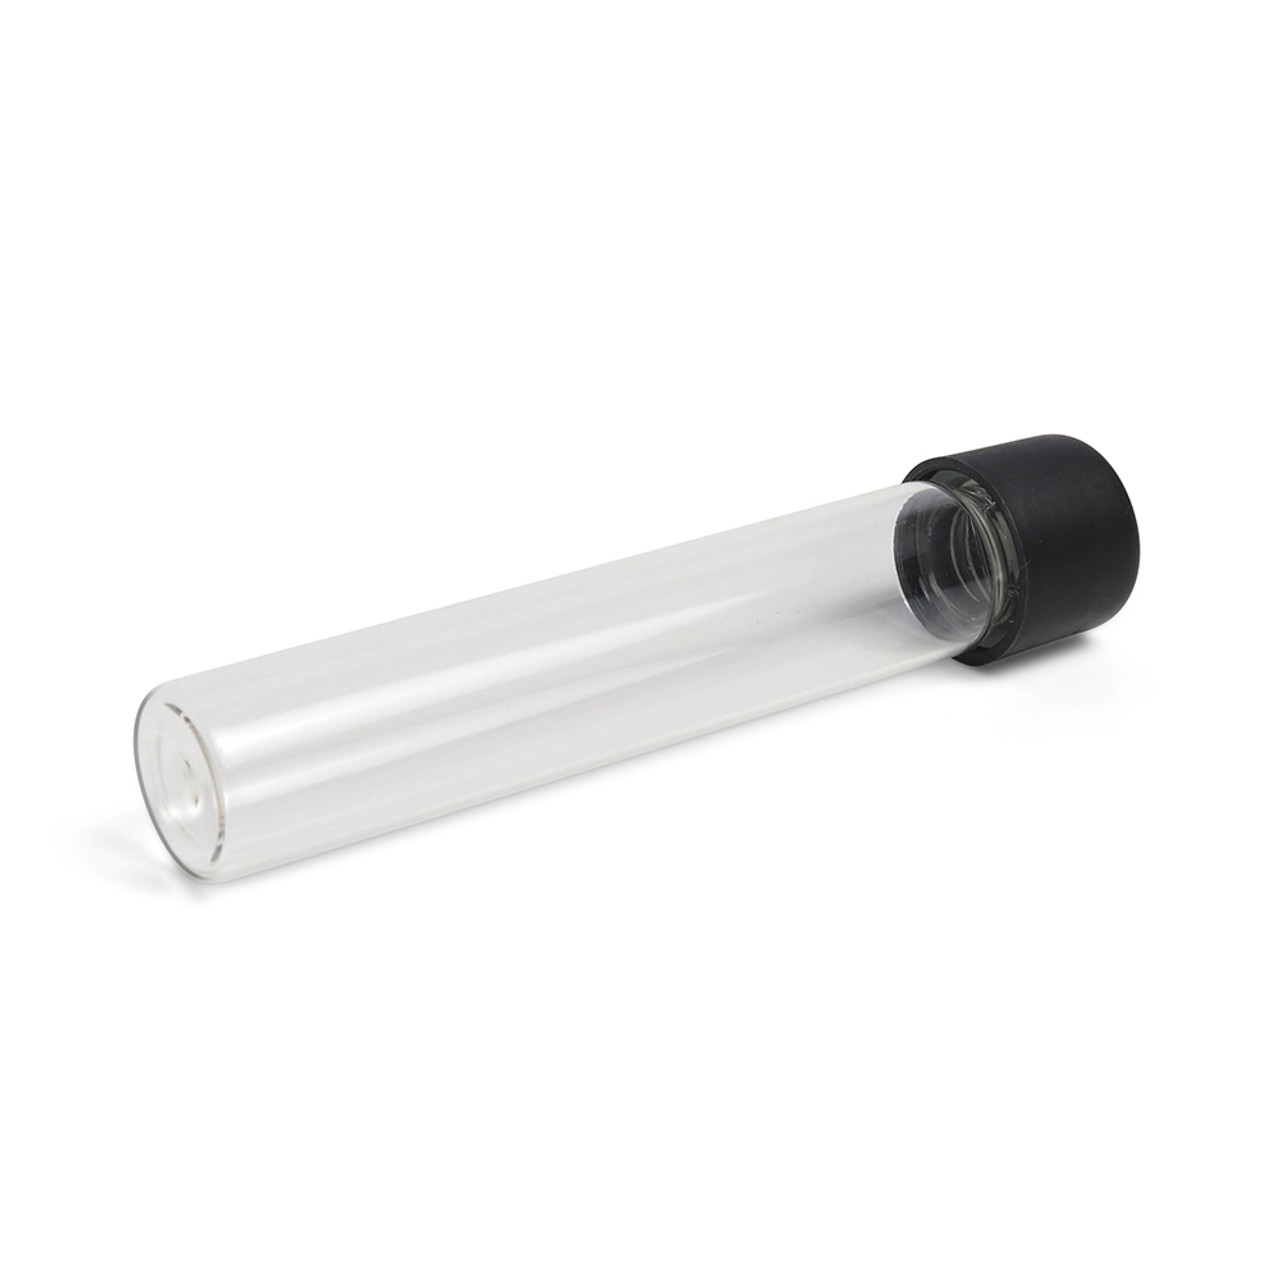 3.3 Clear Glass Pre Roll Tube, Black Pictorial Child Resistant Cap, 20mm  20-400